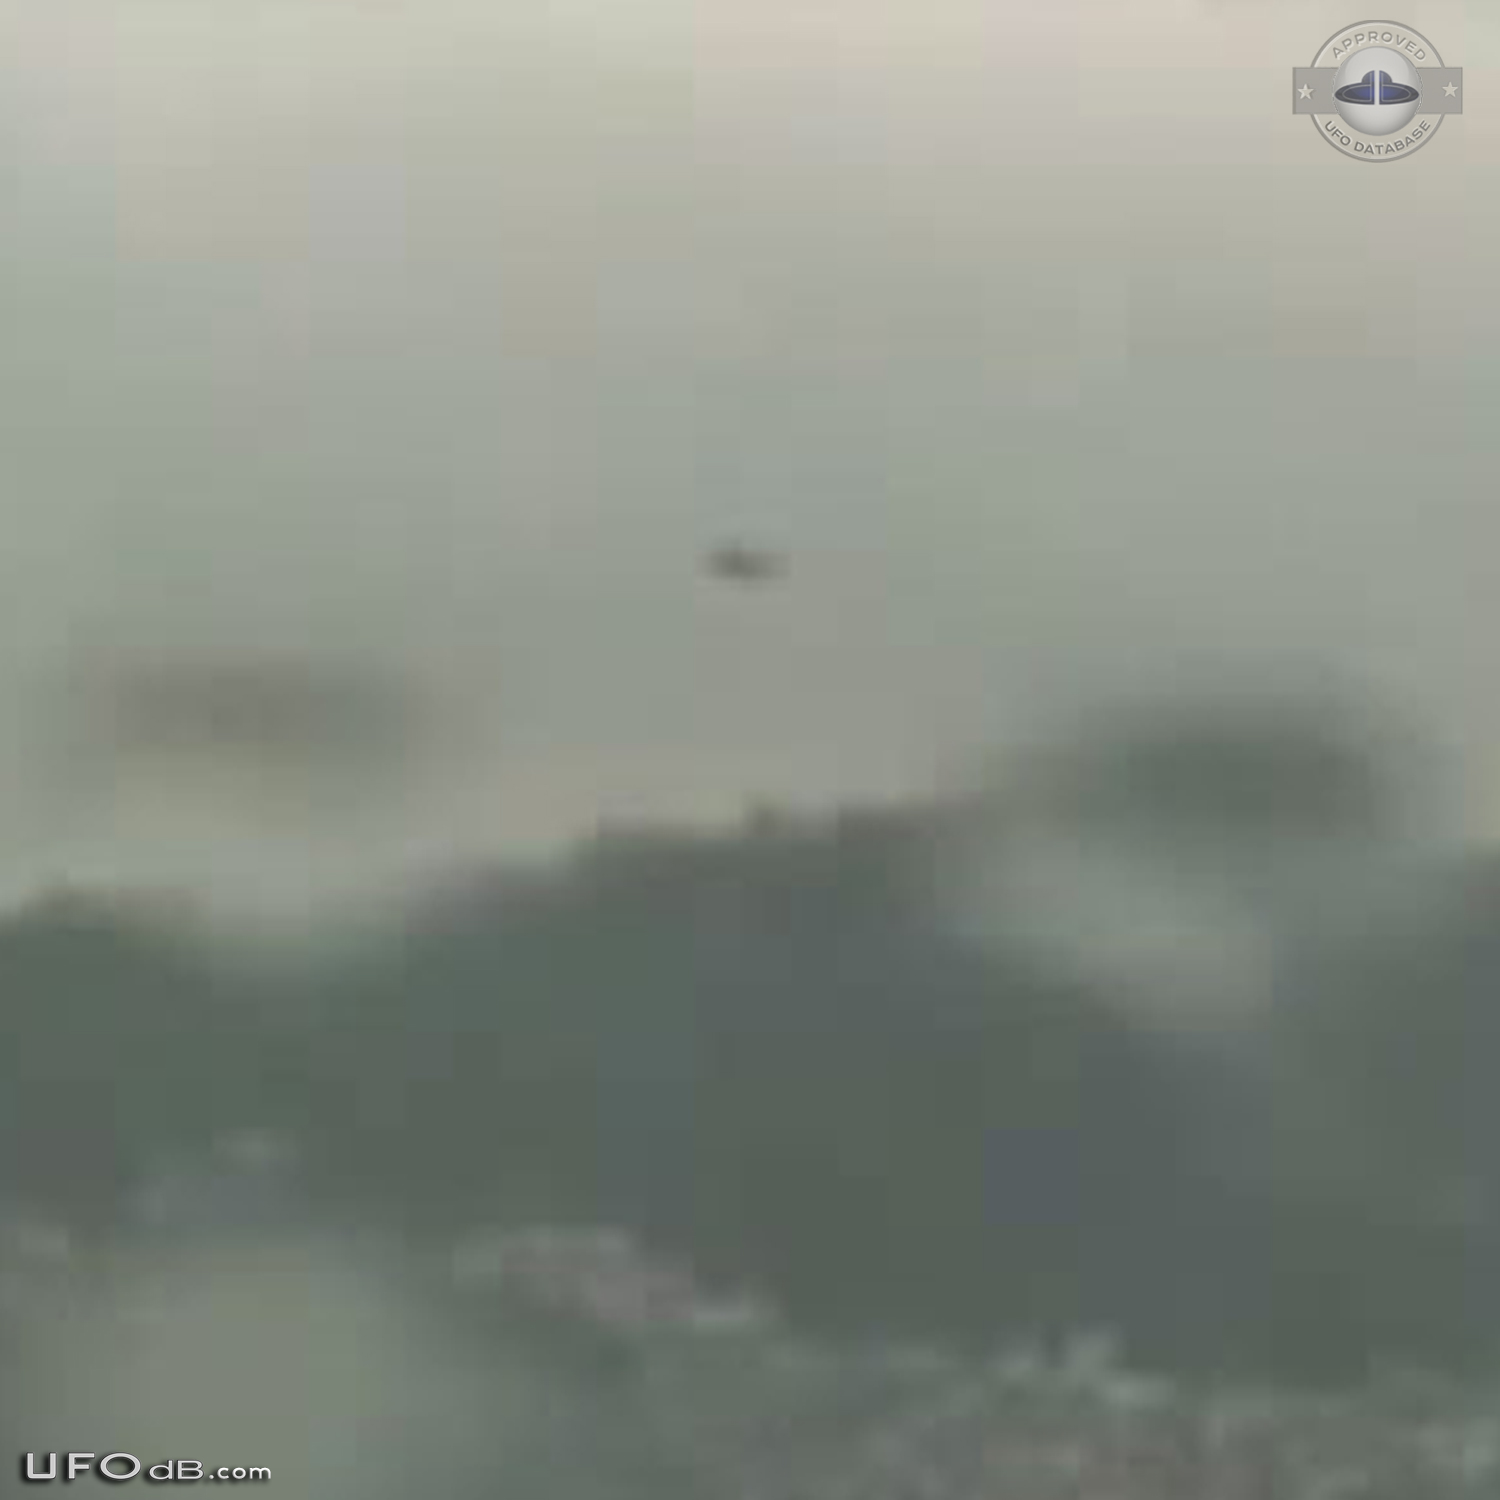 UFO caught on Picture by Hong Kong weather camera - April 2014 UFO Picture #567-5